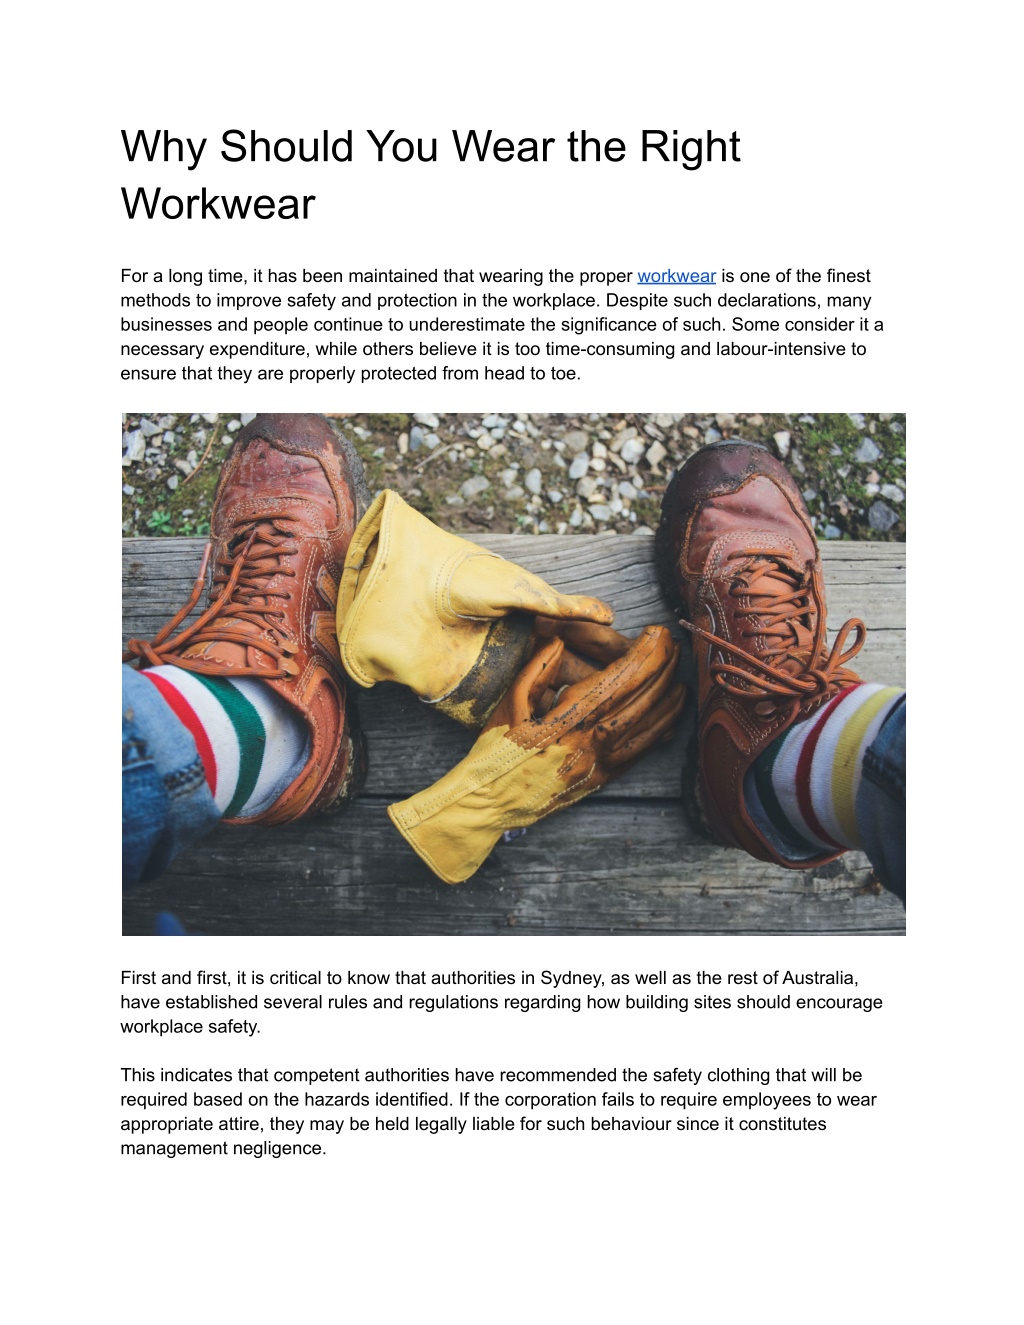 PPT - Why Should You Wear the Right Workwear PowerPoint Presentation ...